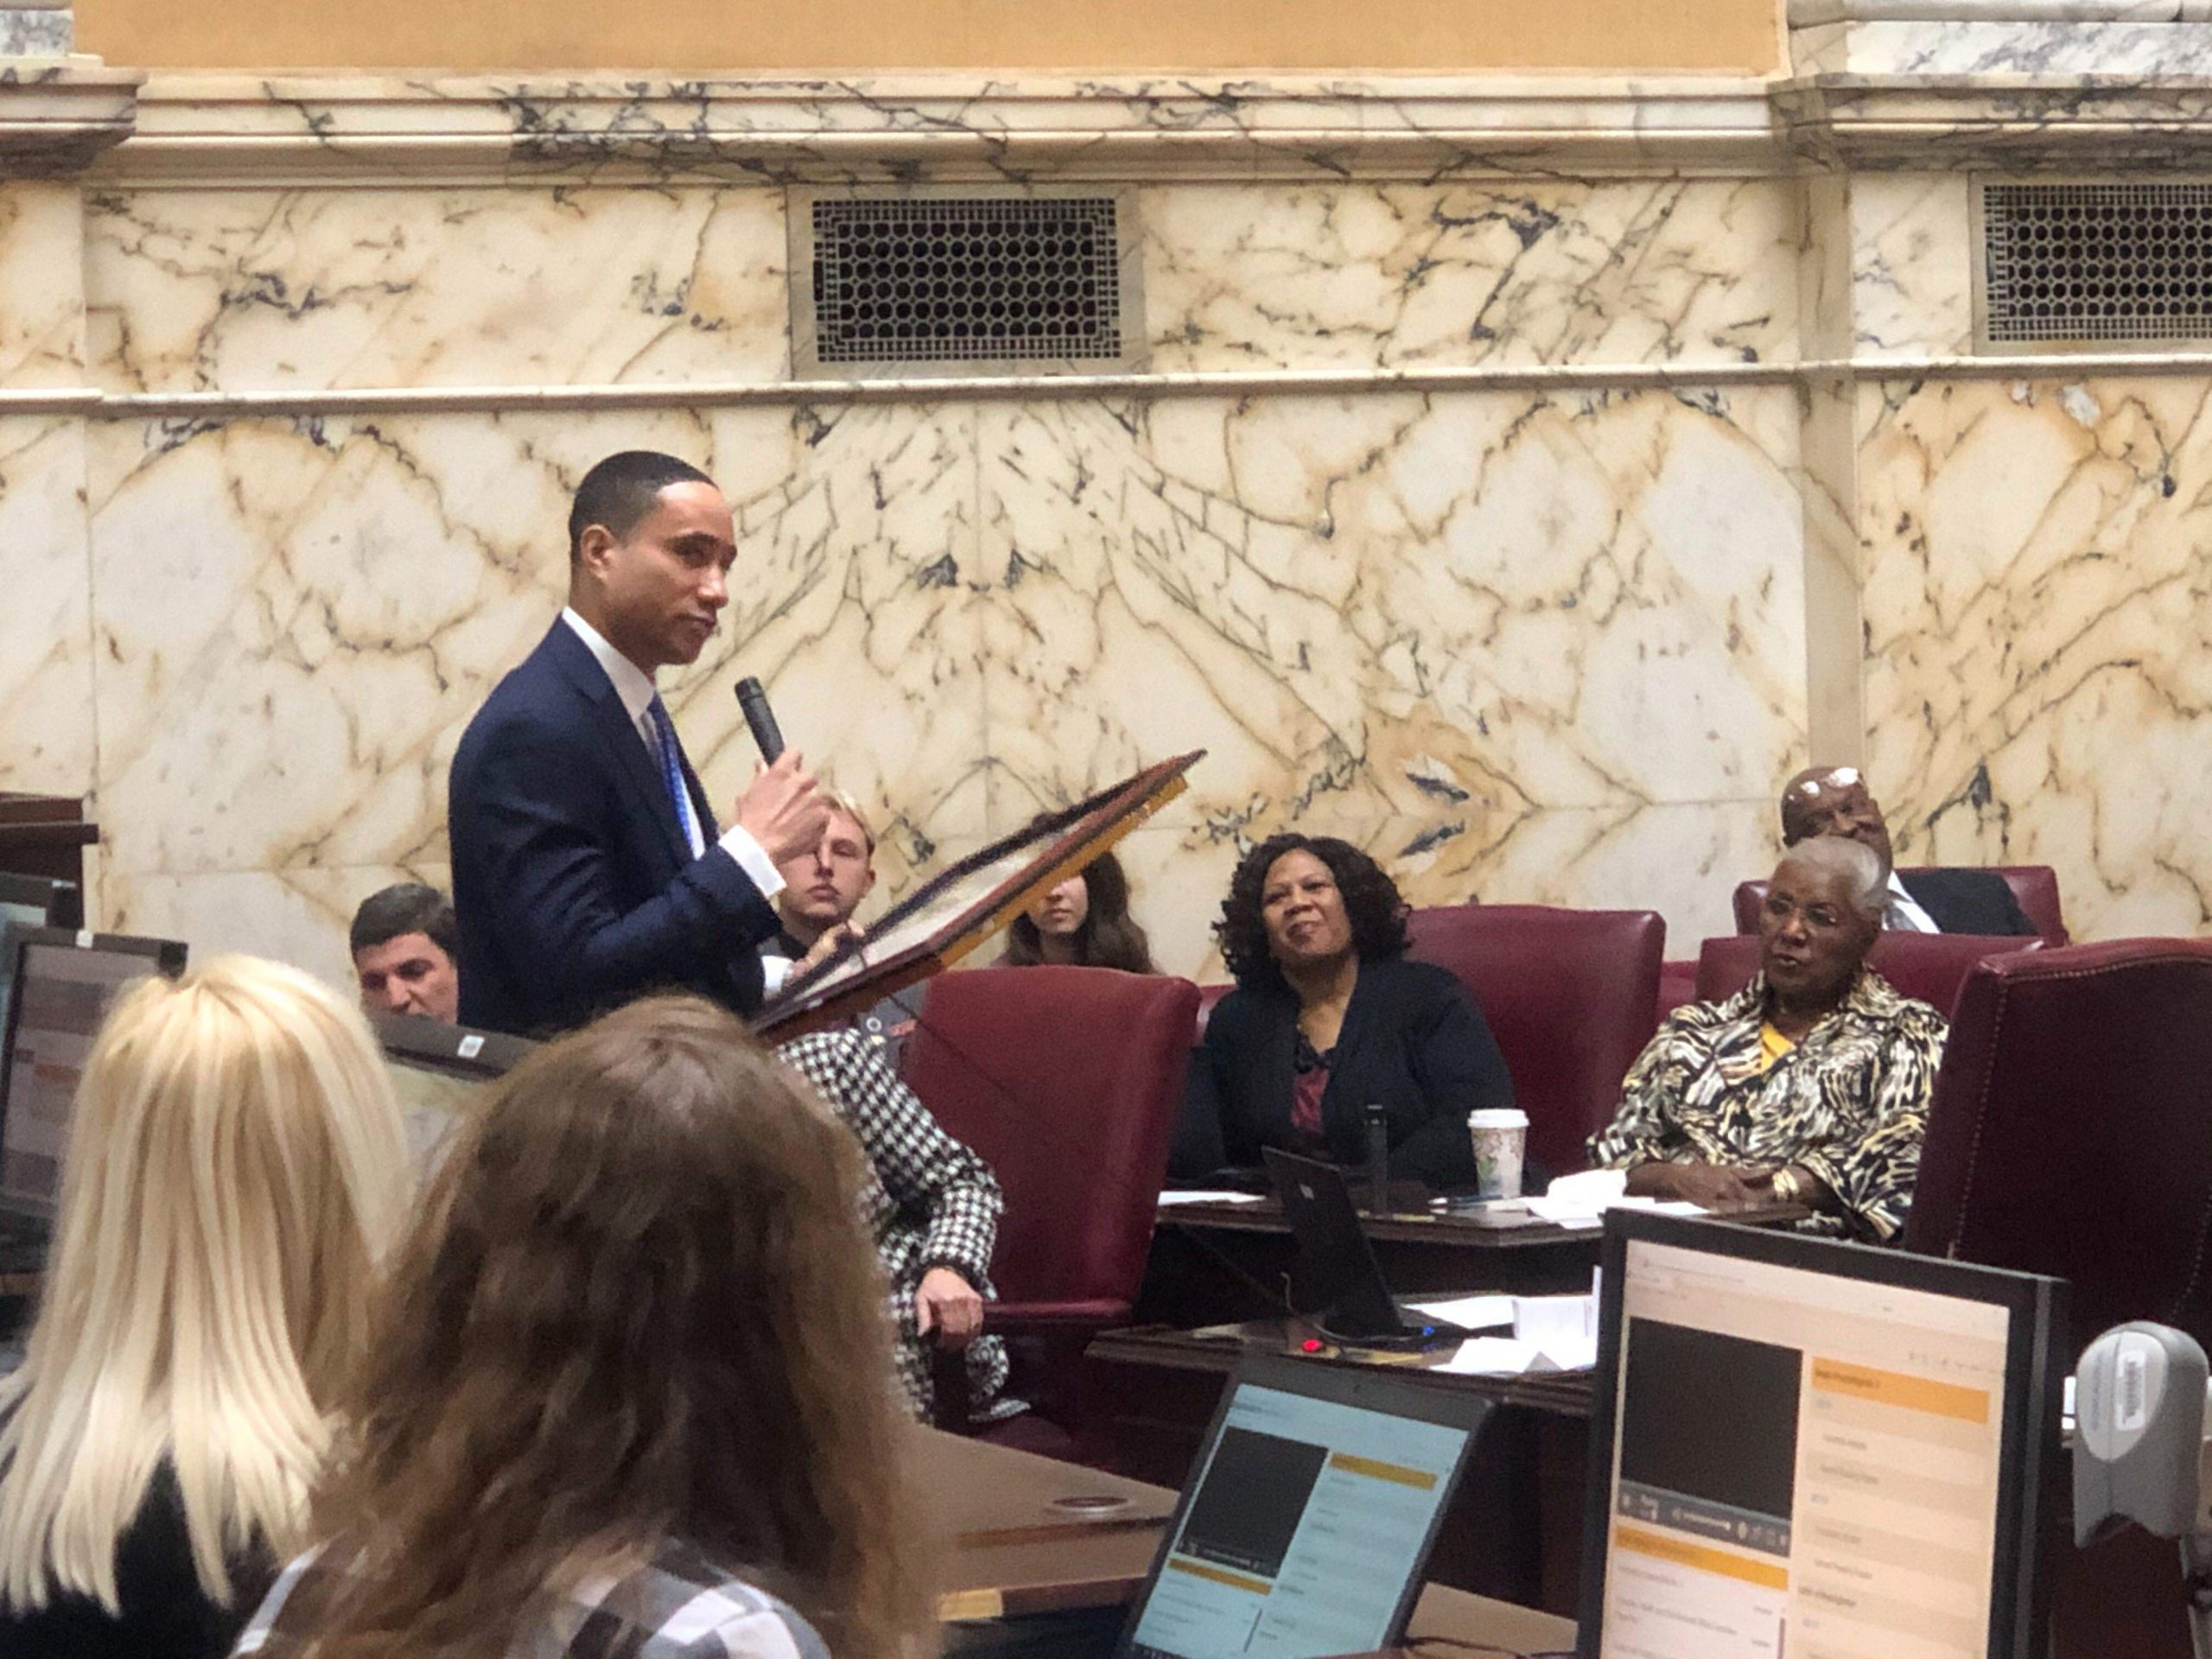 State Sen. William “Will” Smith Jr., D-Montgomery, presents an American flag flown over a United States base in Kabul, Afghanistan, to the Maryland Senate on Friday, January 10, 2020. The flag was flown over the base during his deployment on Sept. 11, 2019. Capital News Service Photo by Ryan E. Little.